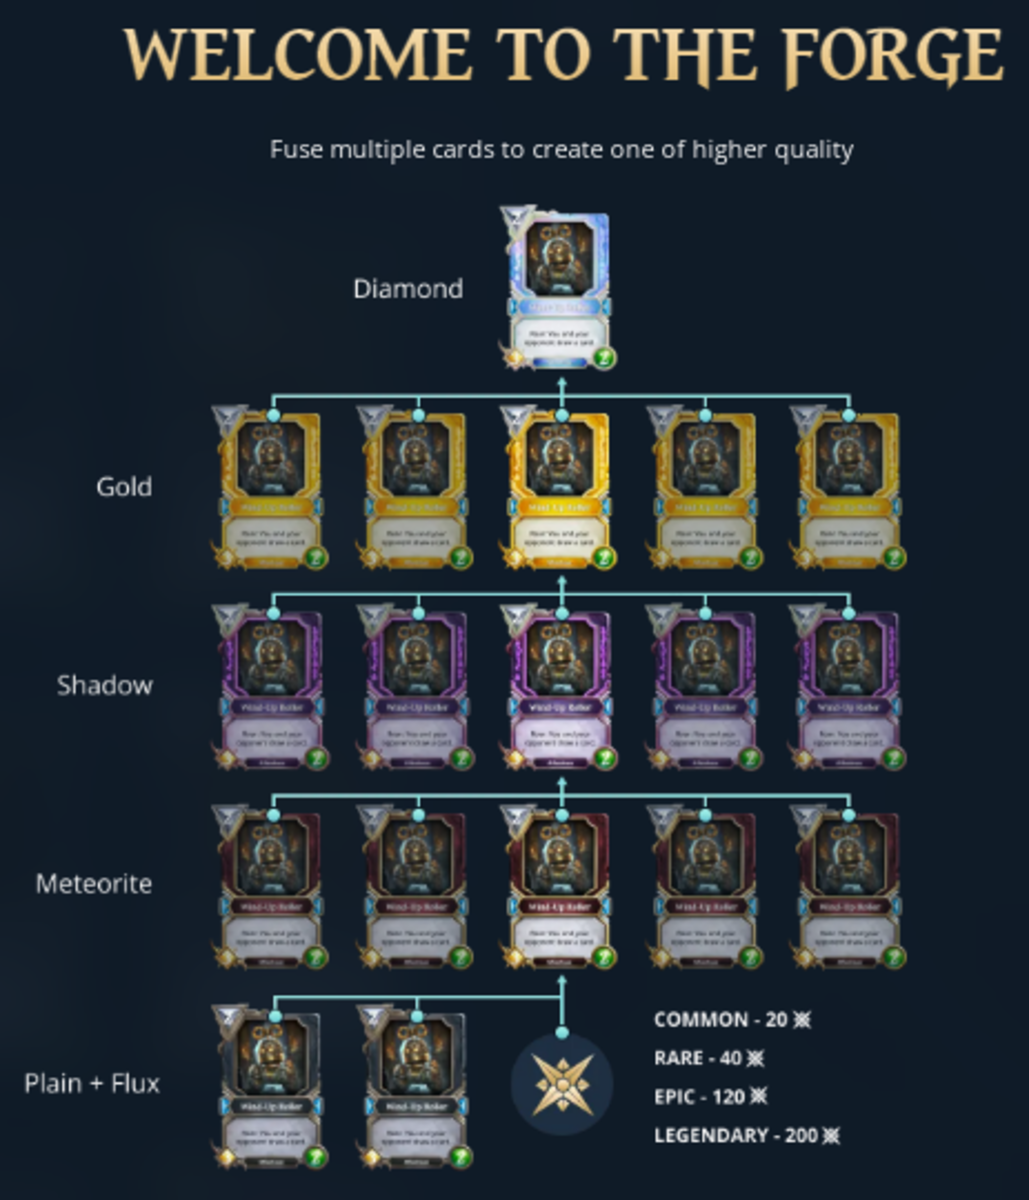 In this image you can see how the Forge of cards at various quality works.